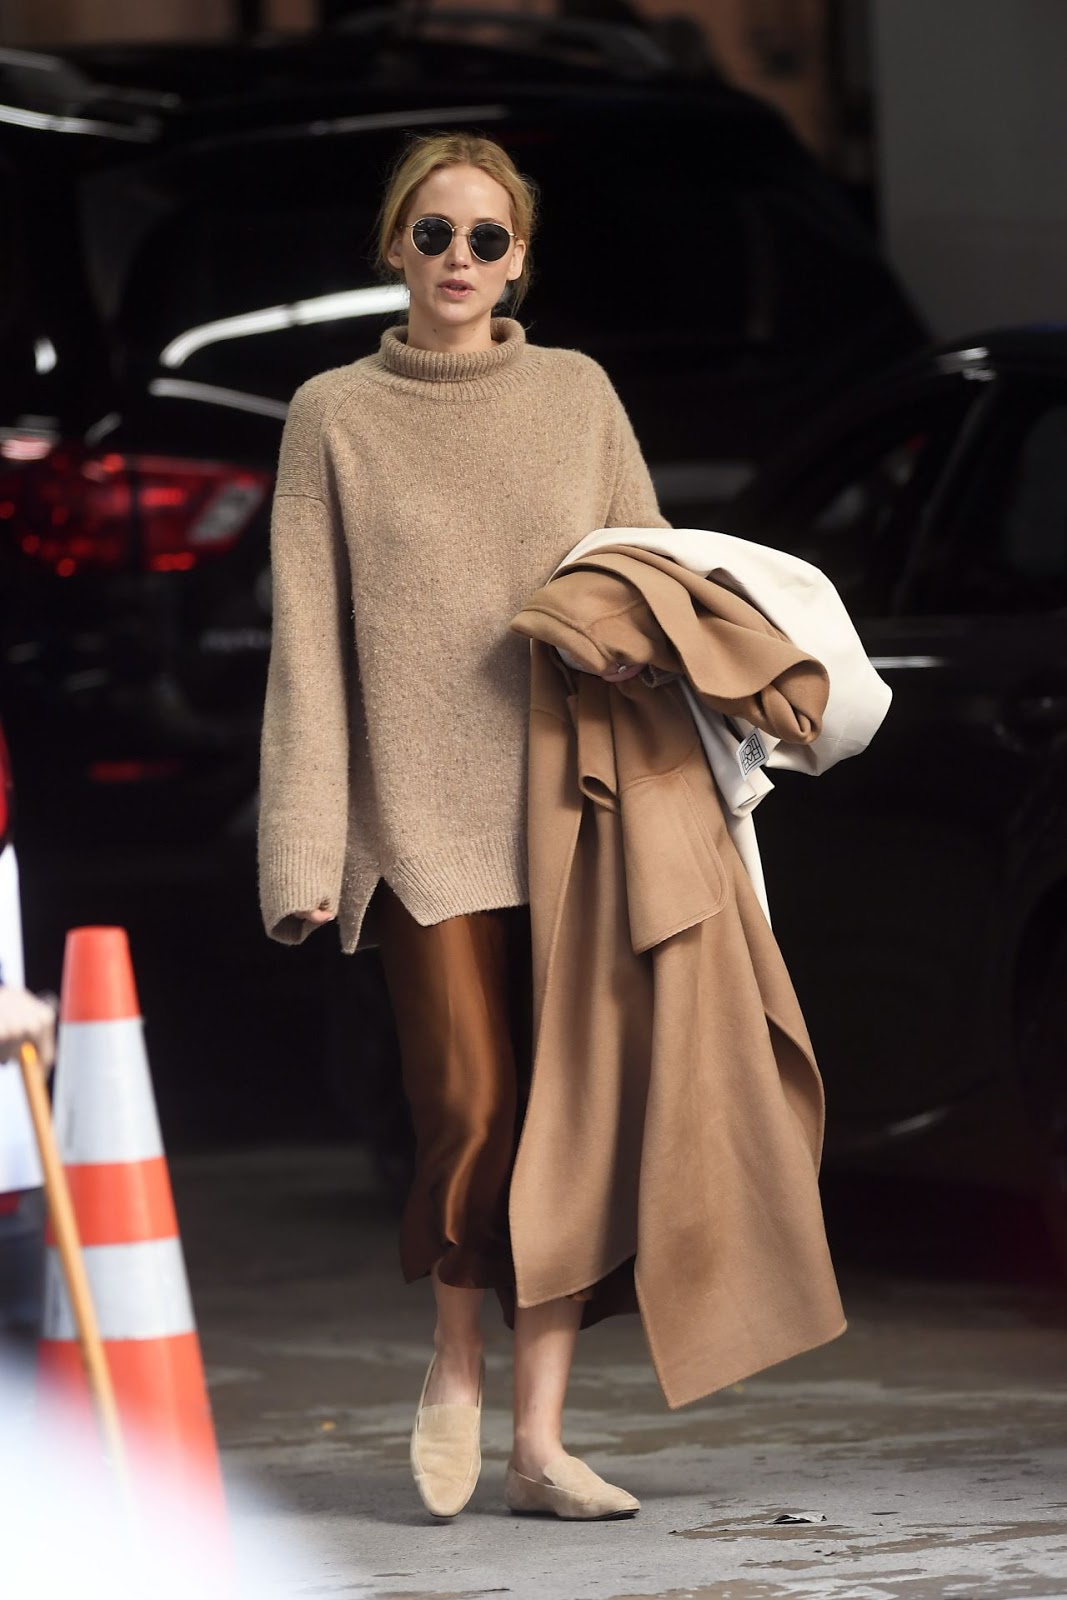 Jennifer Lawrence Stepped Out In an Incredibly Stylish Fall Look — Turtleneck Sweater and Satin Skirt